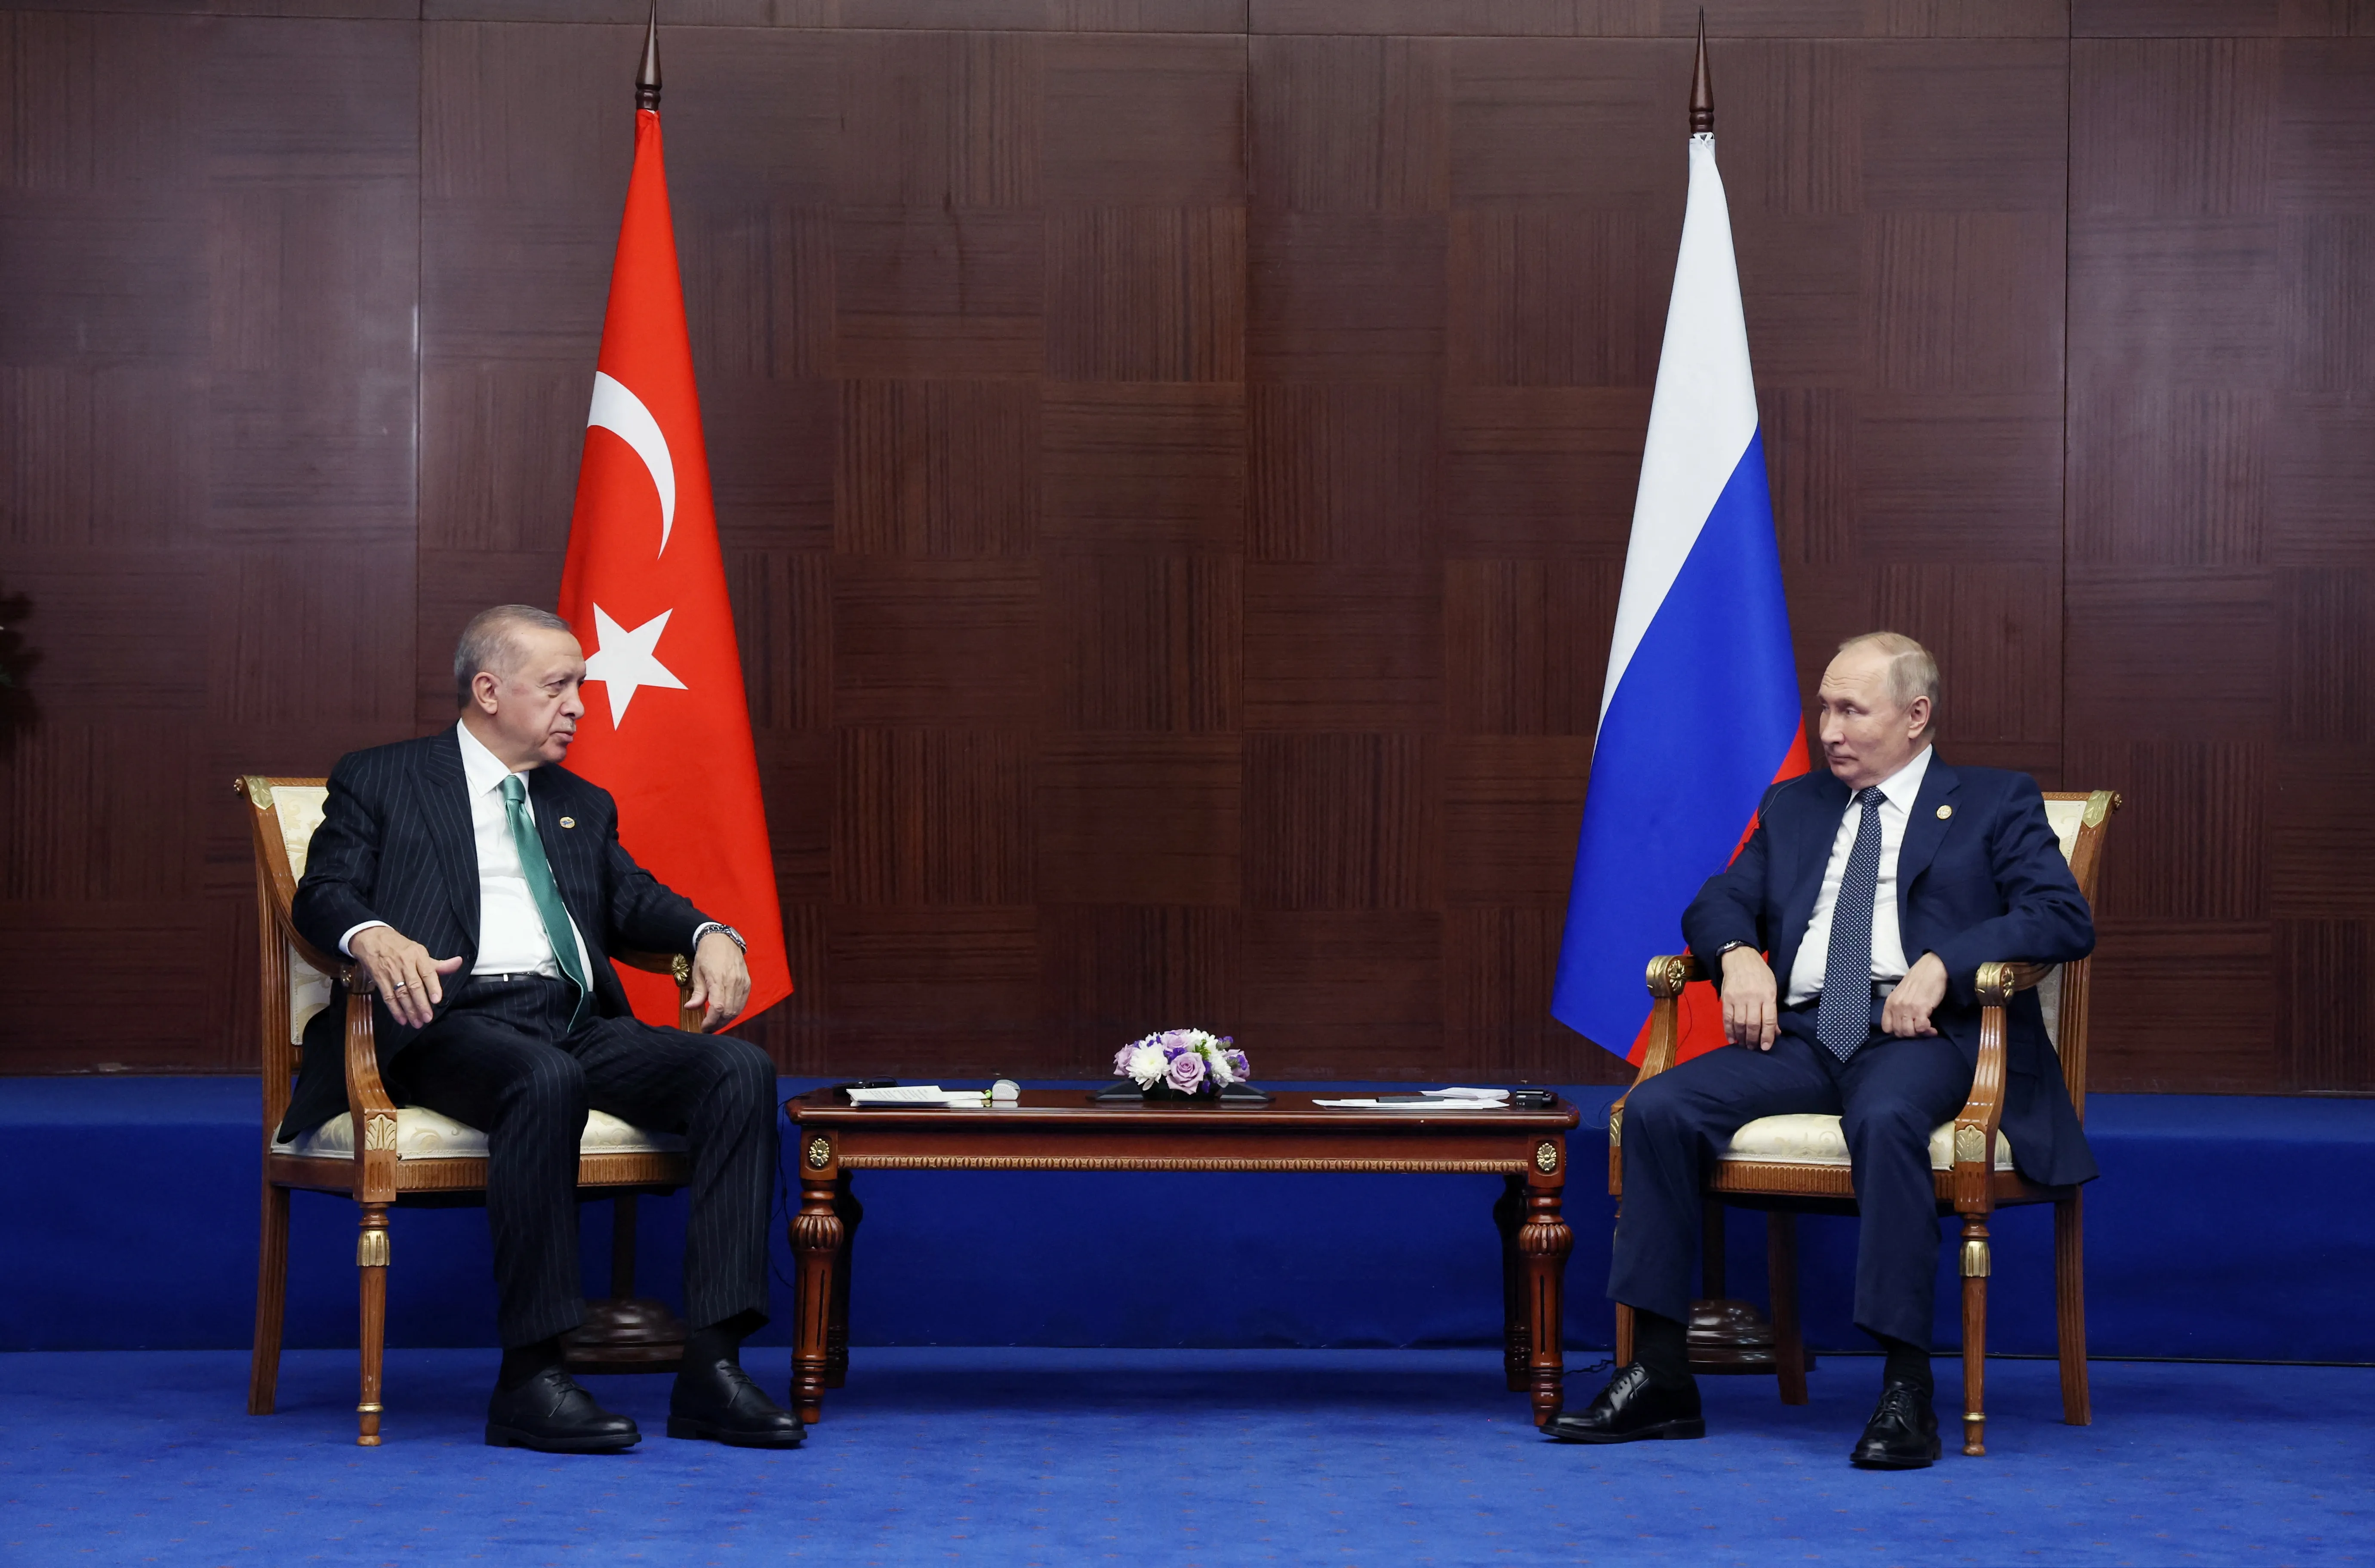 Russia's President Vladimir Putin and Turkey's President Tayyip Erdogan meet on the sidelines of the 6th summit of the Conference on Interaction and Confidence-building Measures in Asia (CICA), in Astana, Kazakhstan October 13, 2022.   Sputnik/Vyacheslav Prokofyev/Pool via REUTERS ATTENTION EDITORS - THIS IMAGE WAS PROVIDED BY A THIRD PARTY.